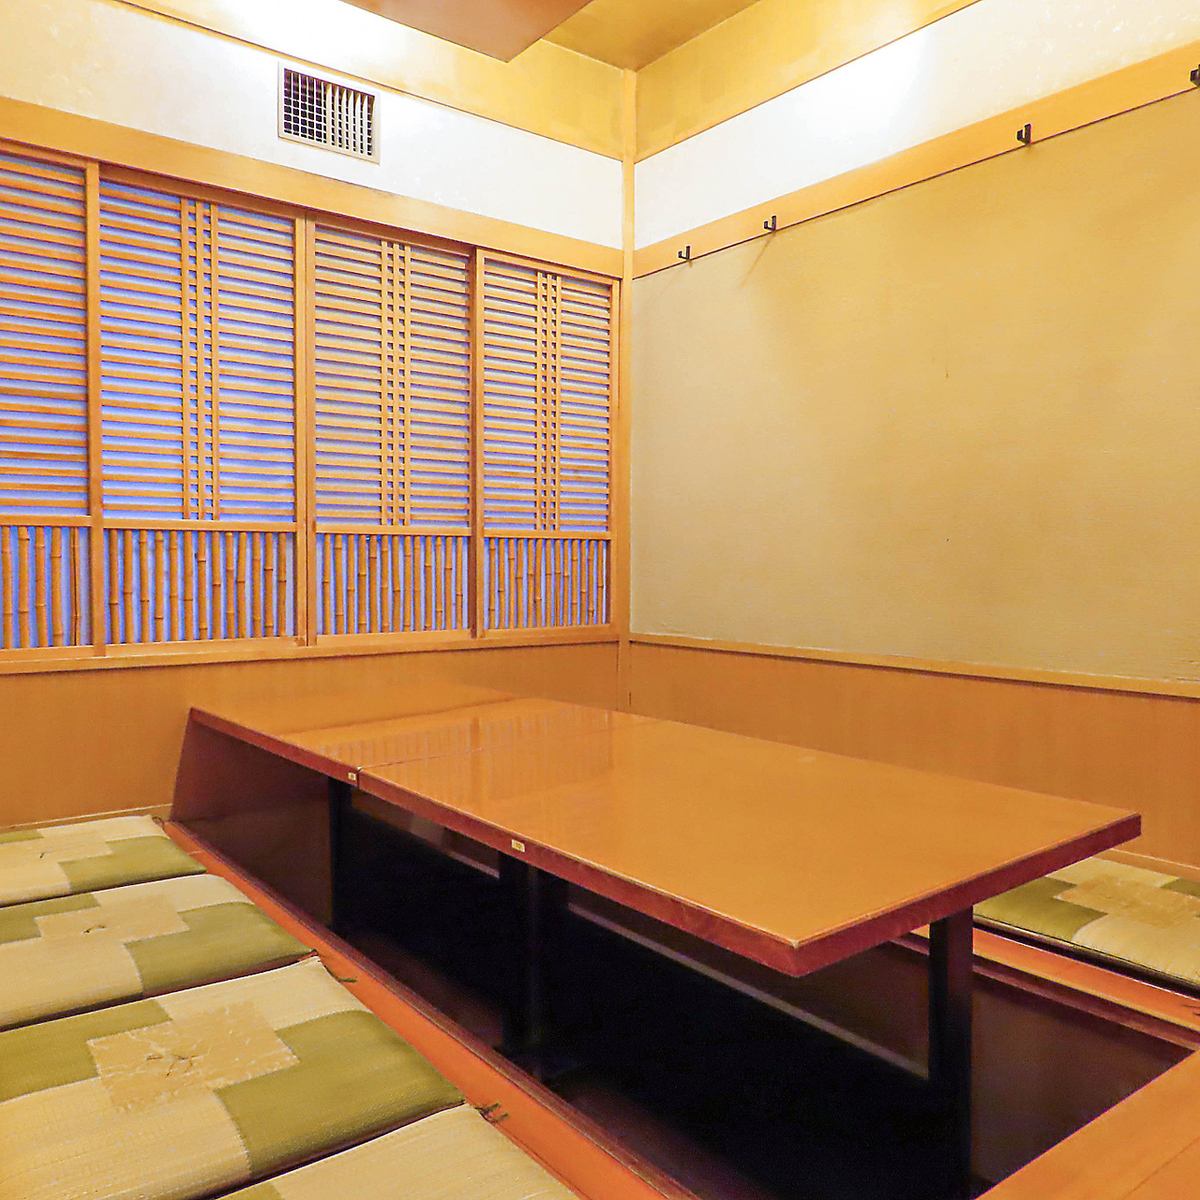 We look forward to serving you on important days such as memorial services, Shichi-Go-San festivals, and the beginning of your meal.